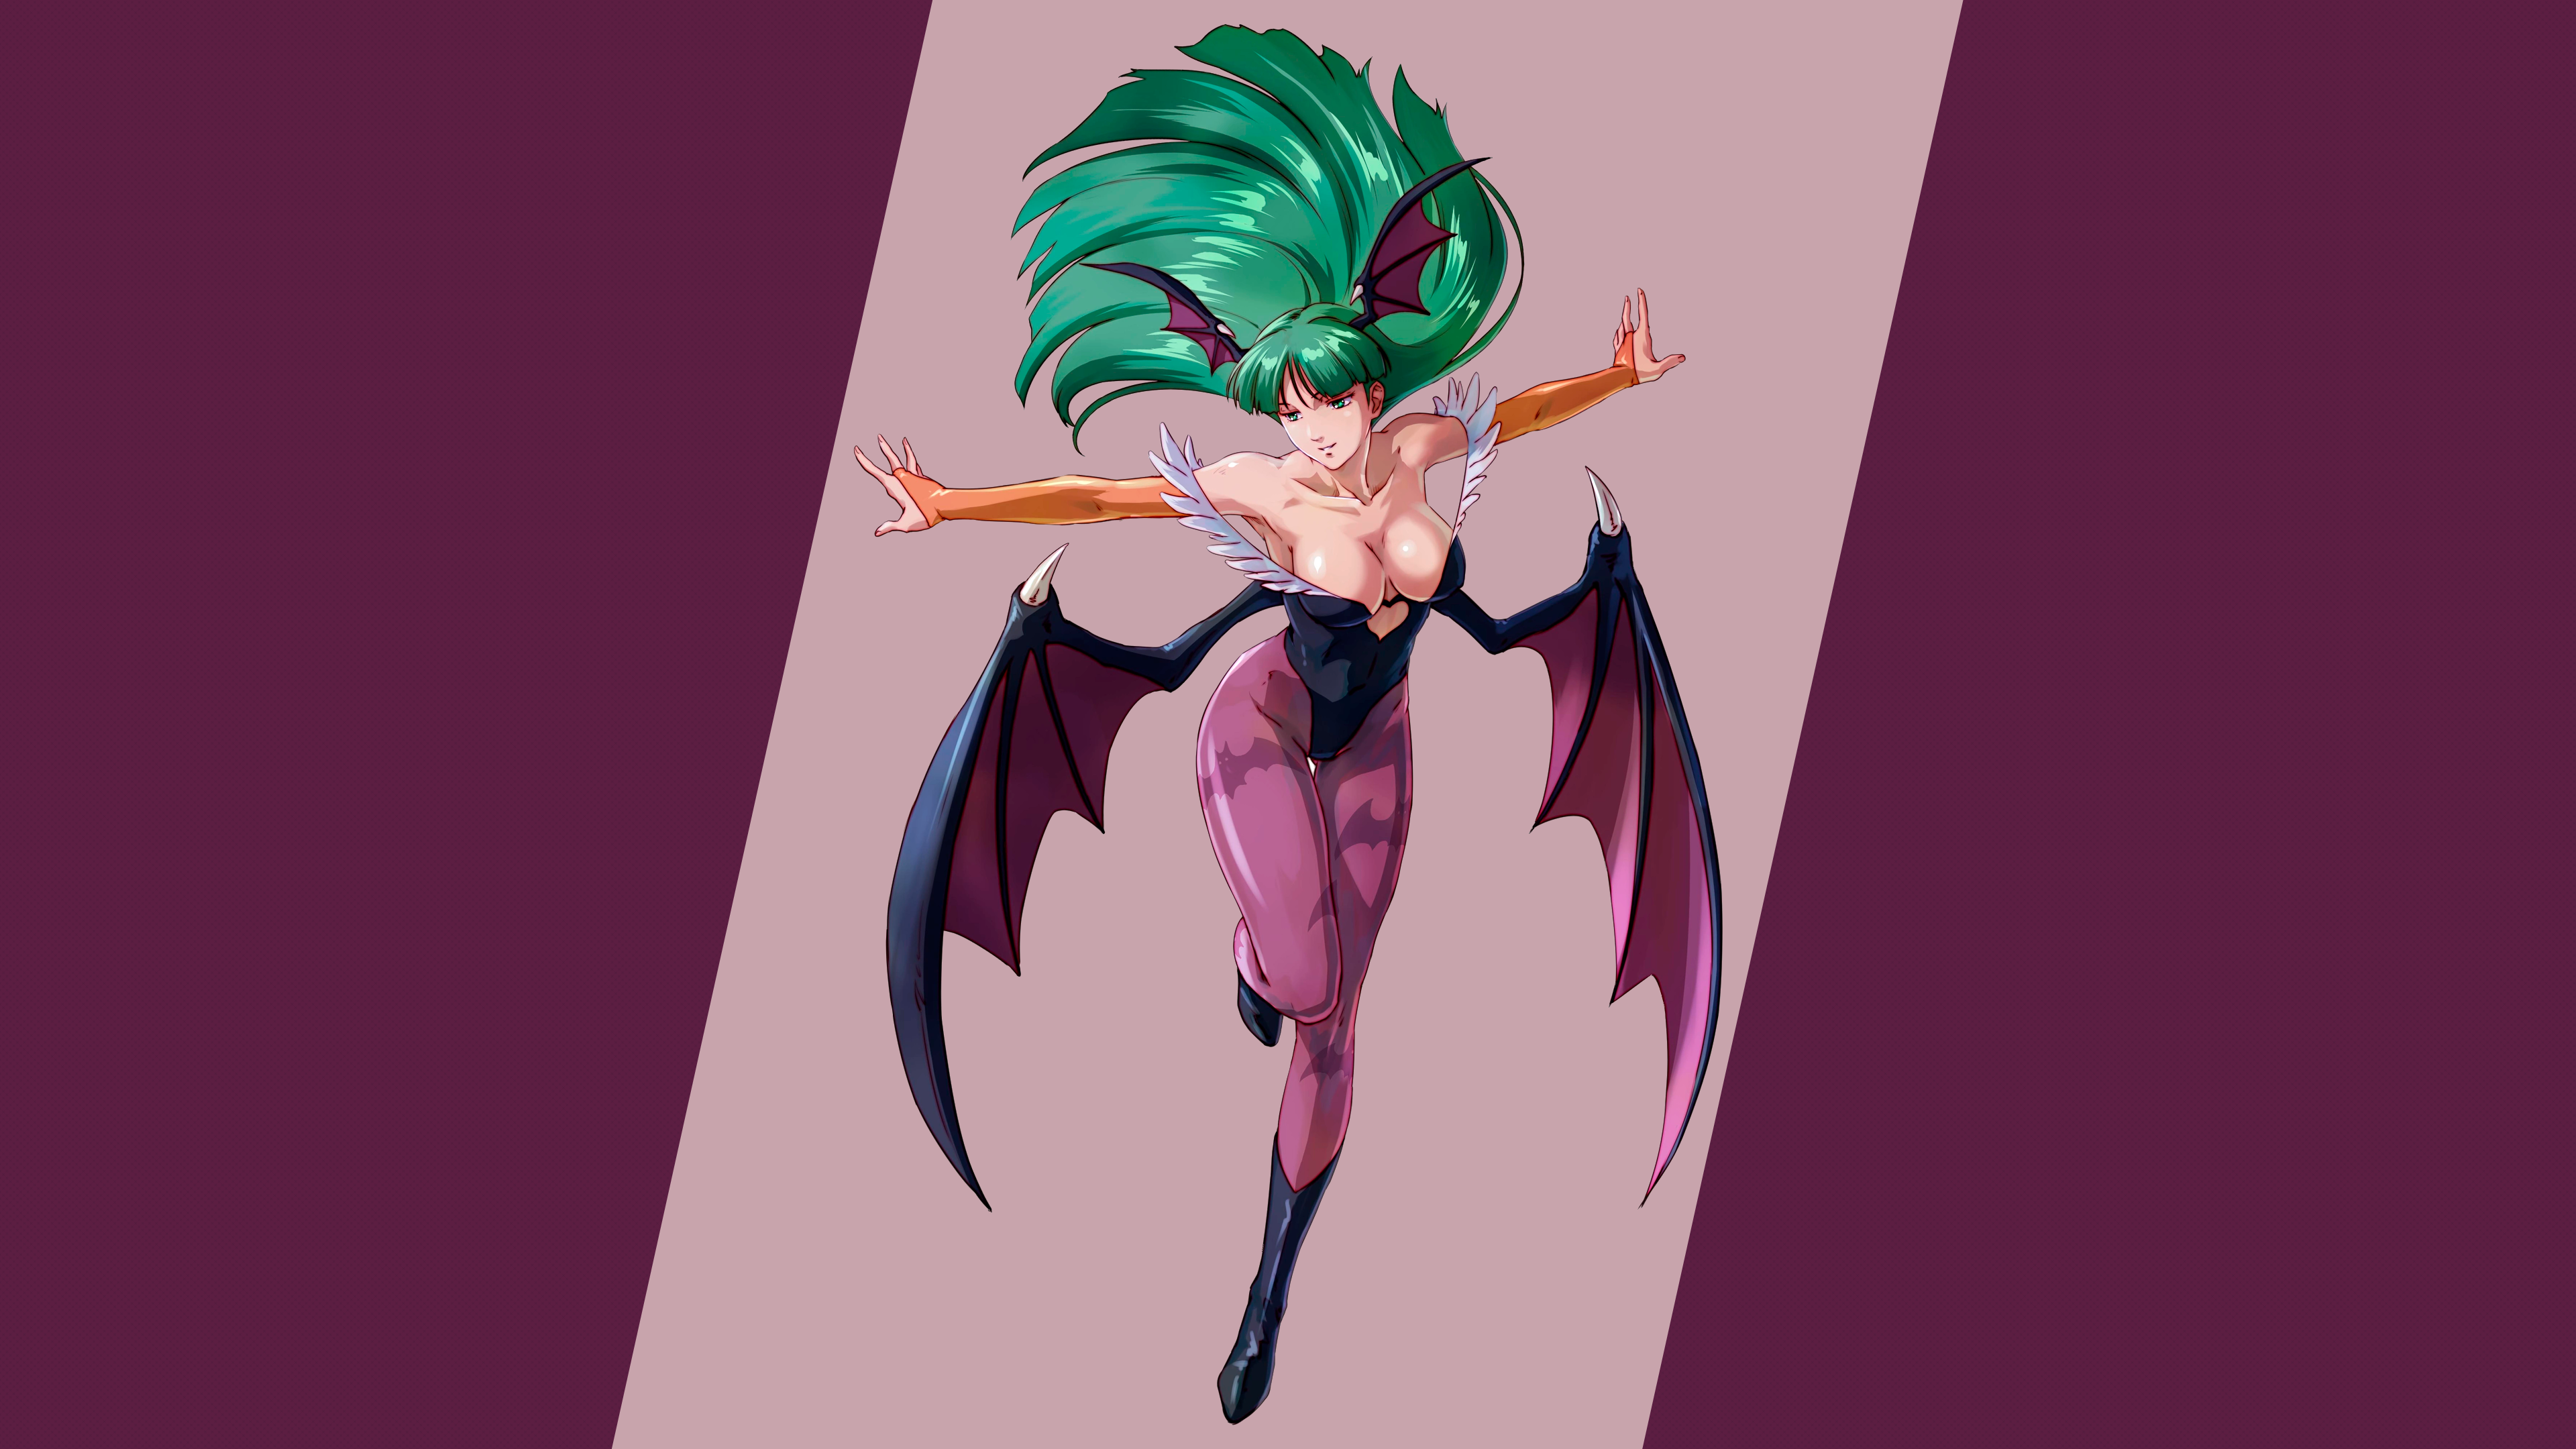 Anime 3840x2160 video games video game girls long hair simple background Capcom bangs anime girls Morrigan Aensland vampires succubus wings anime girl with wings head wings bat wings leggings tight clothing leotard black leotard cleavage boobs big boobs arm warmers green hair fighting games Darkstalkers boots black boots fangs thighs together thick thigh green eyes armpits clothing cutout belly button